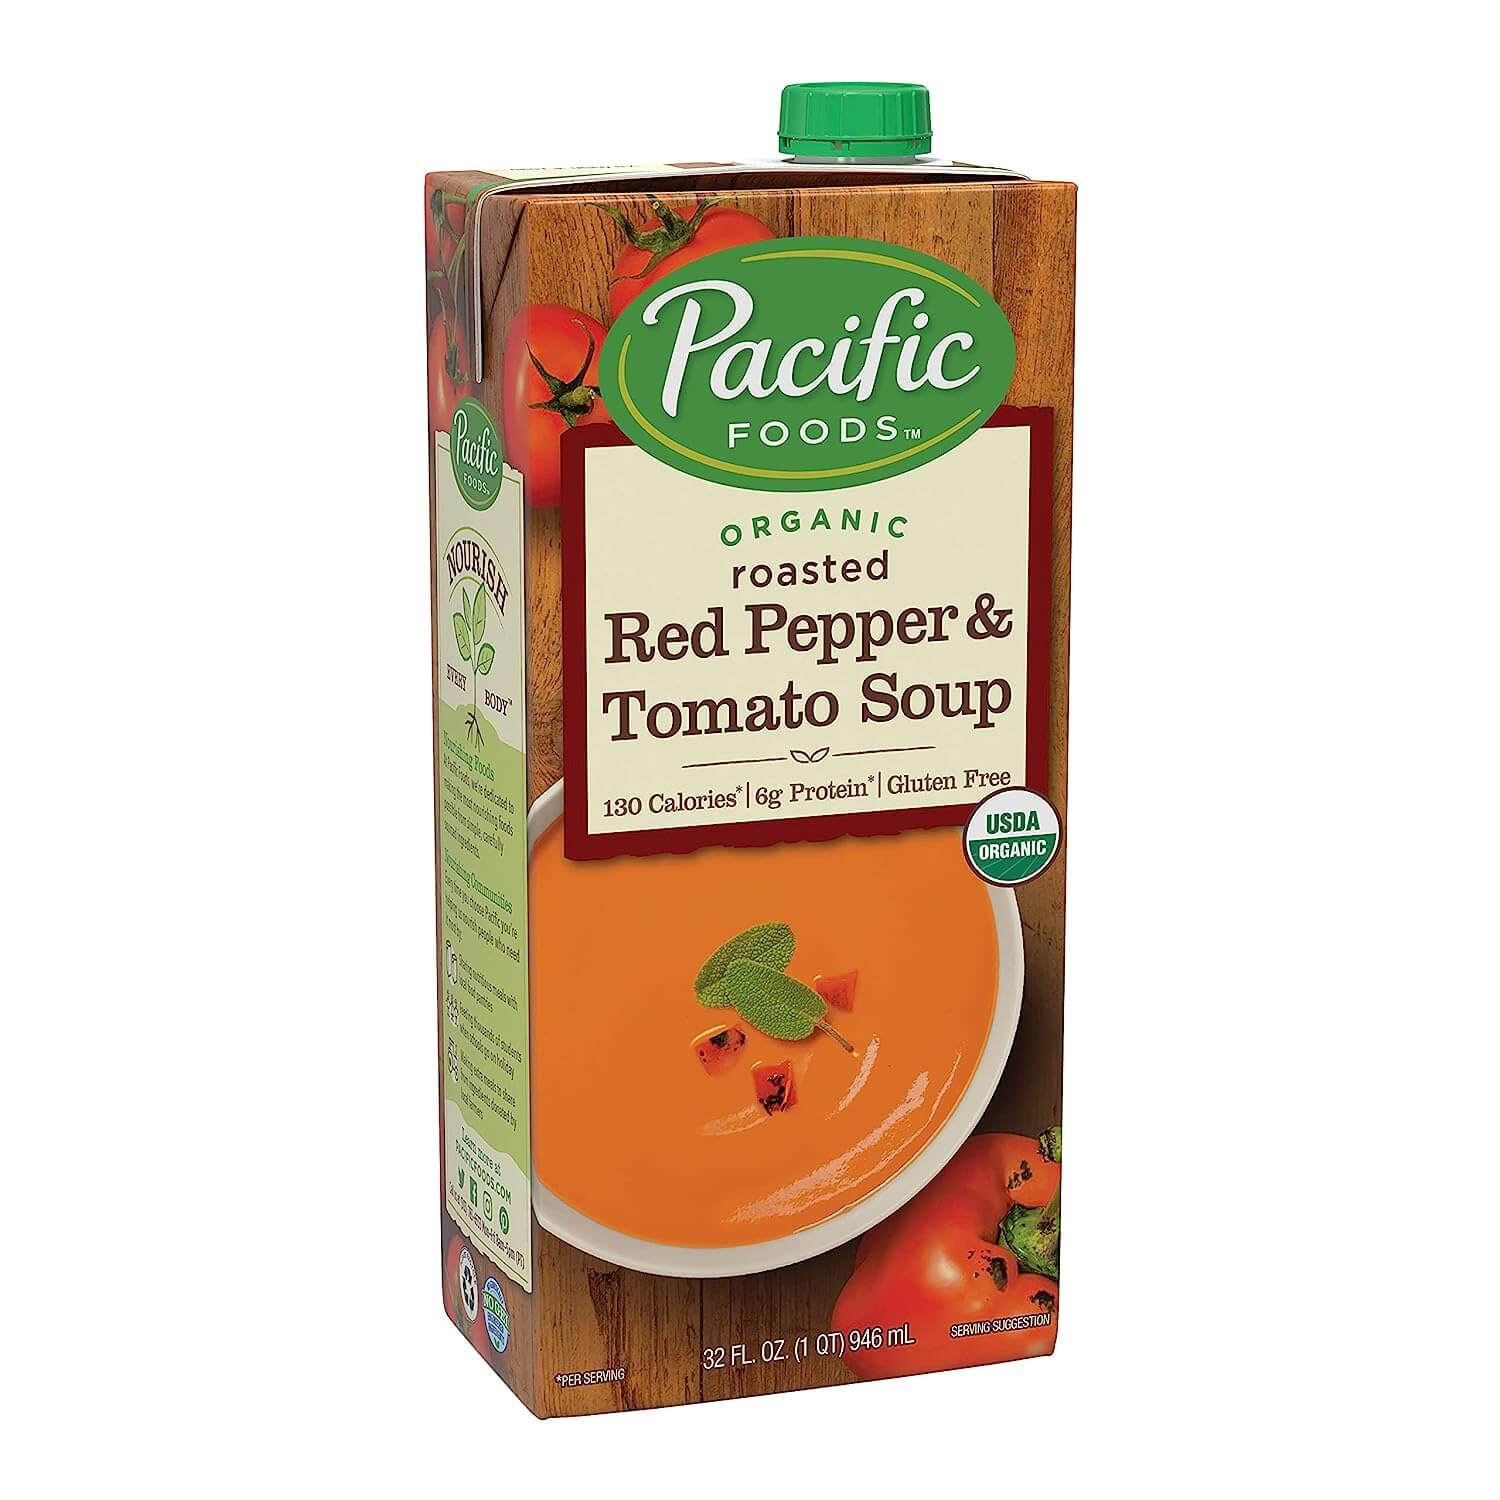 Pacific Organic Roasted Red Pepper and Tomato Soup